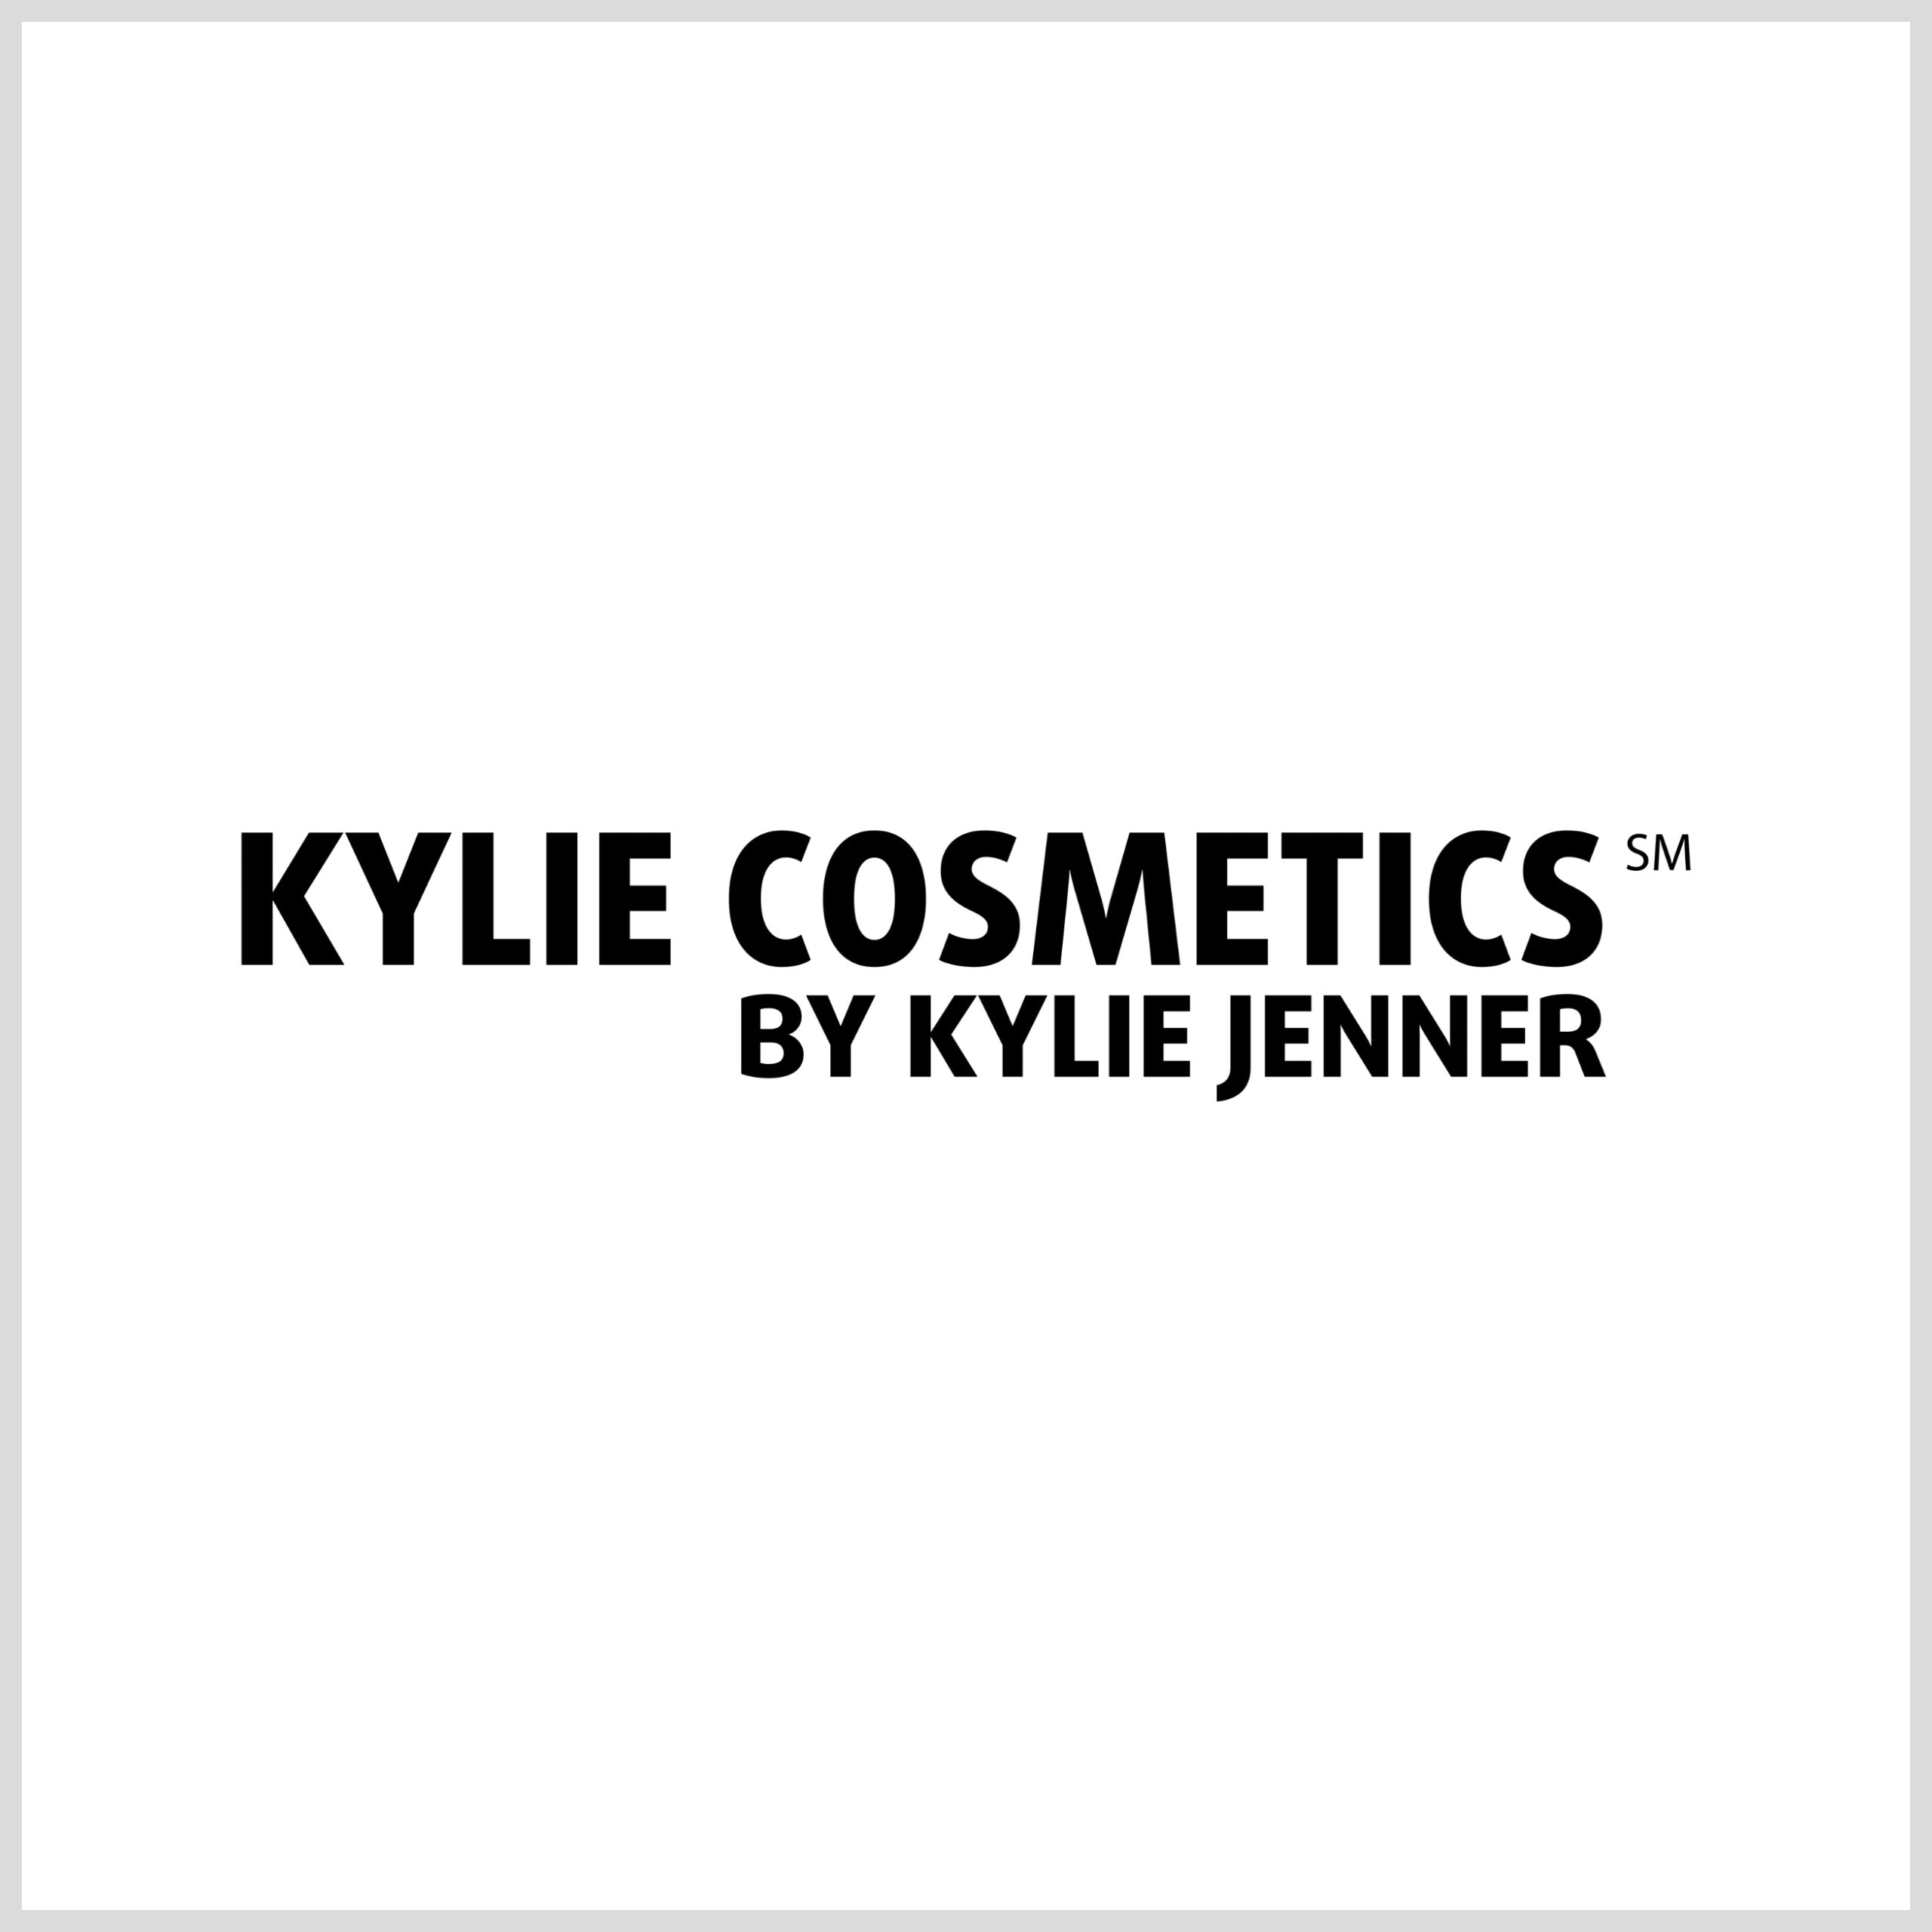 Cosmic Kylie Jenner 50ml & Travel Spray Duo | Fragrance | Kylie Cosmetics  by Kylie Jenner